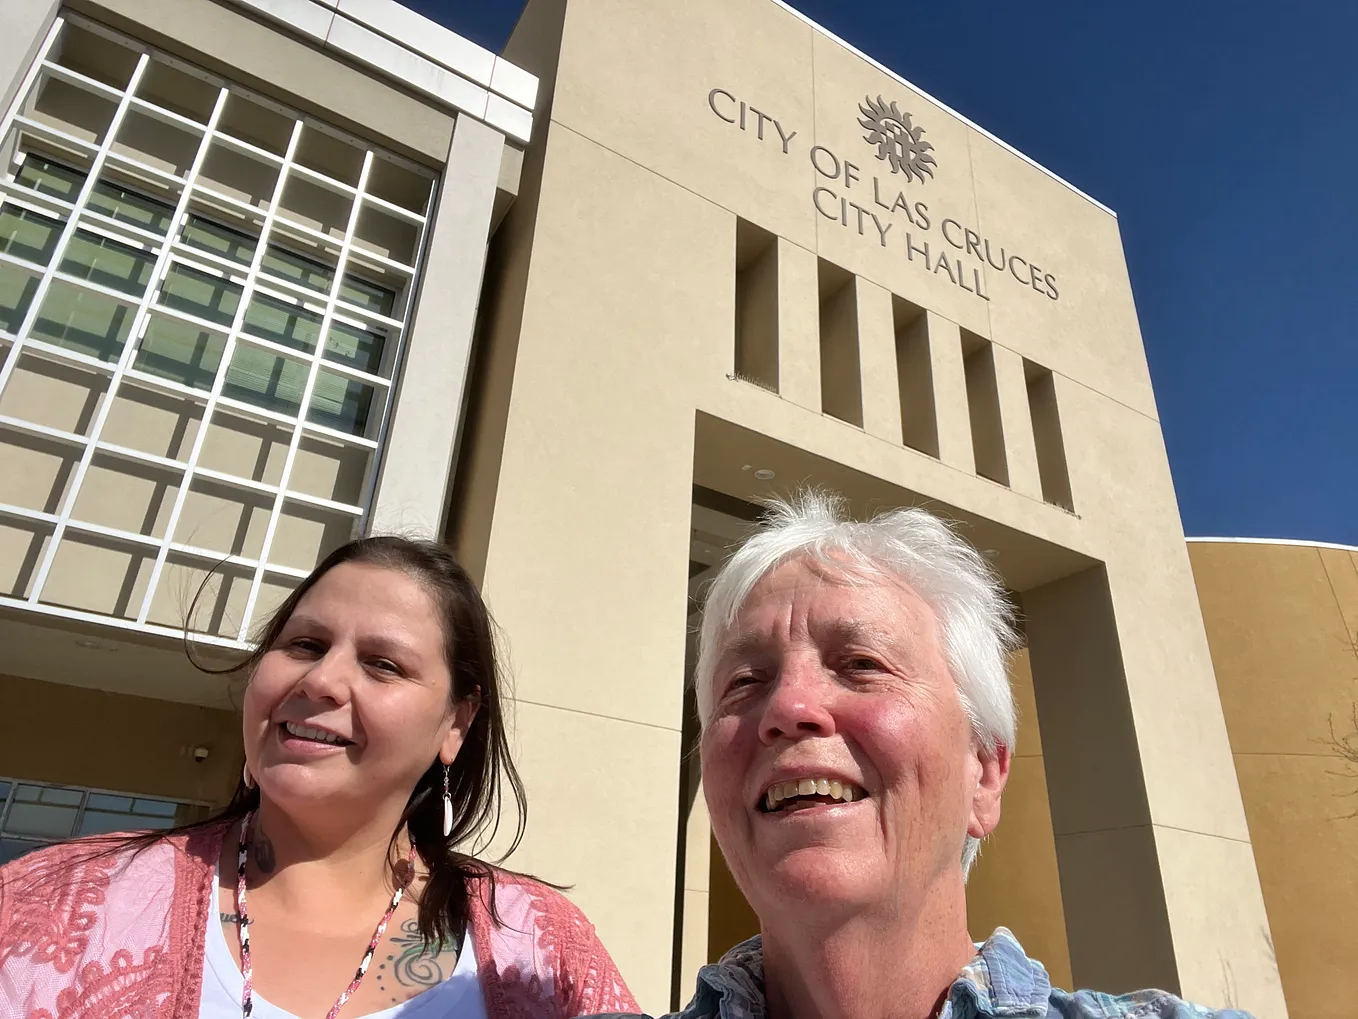 Dawn Zephier (L) and Diane Nilan, in front of City of Las Cruces City Hall